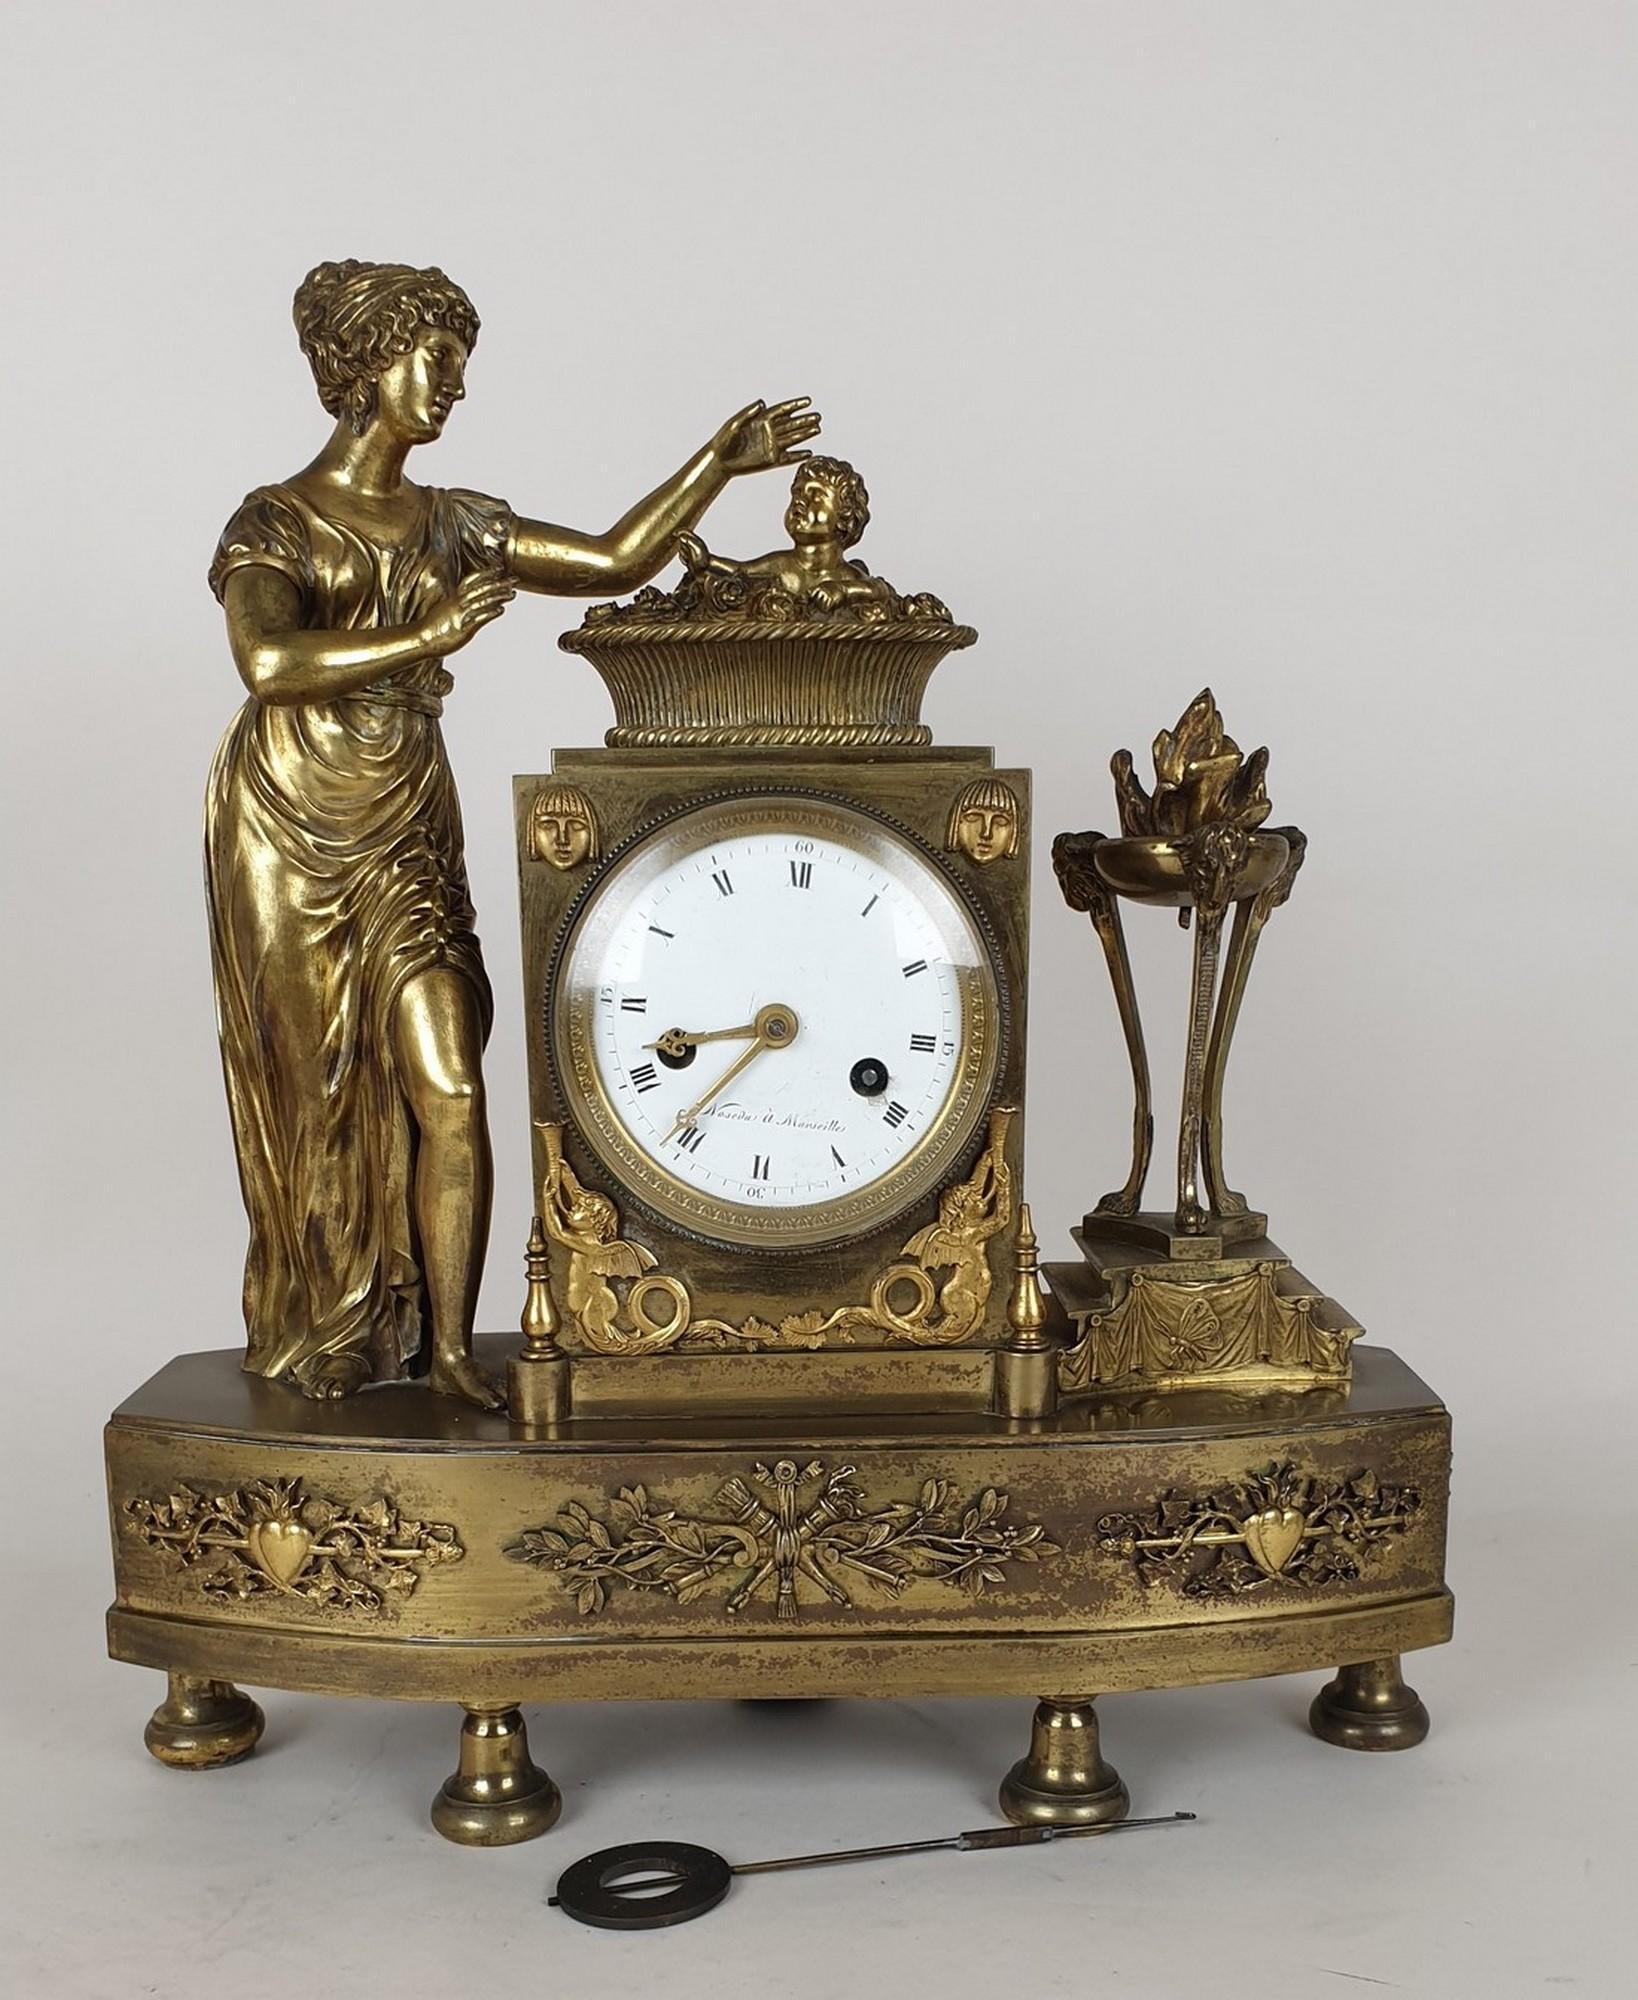 Patinated bronze clock representing The Birth of the King of Rome or the allegory of the Birth of Love

Empress Marie-Louise is standing near a cradle filled with roses with a winged cupid in the middle; decor of an Athenian woman with rams' heads